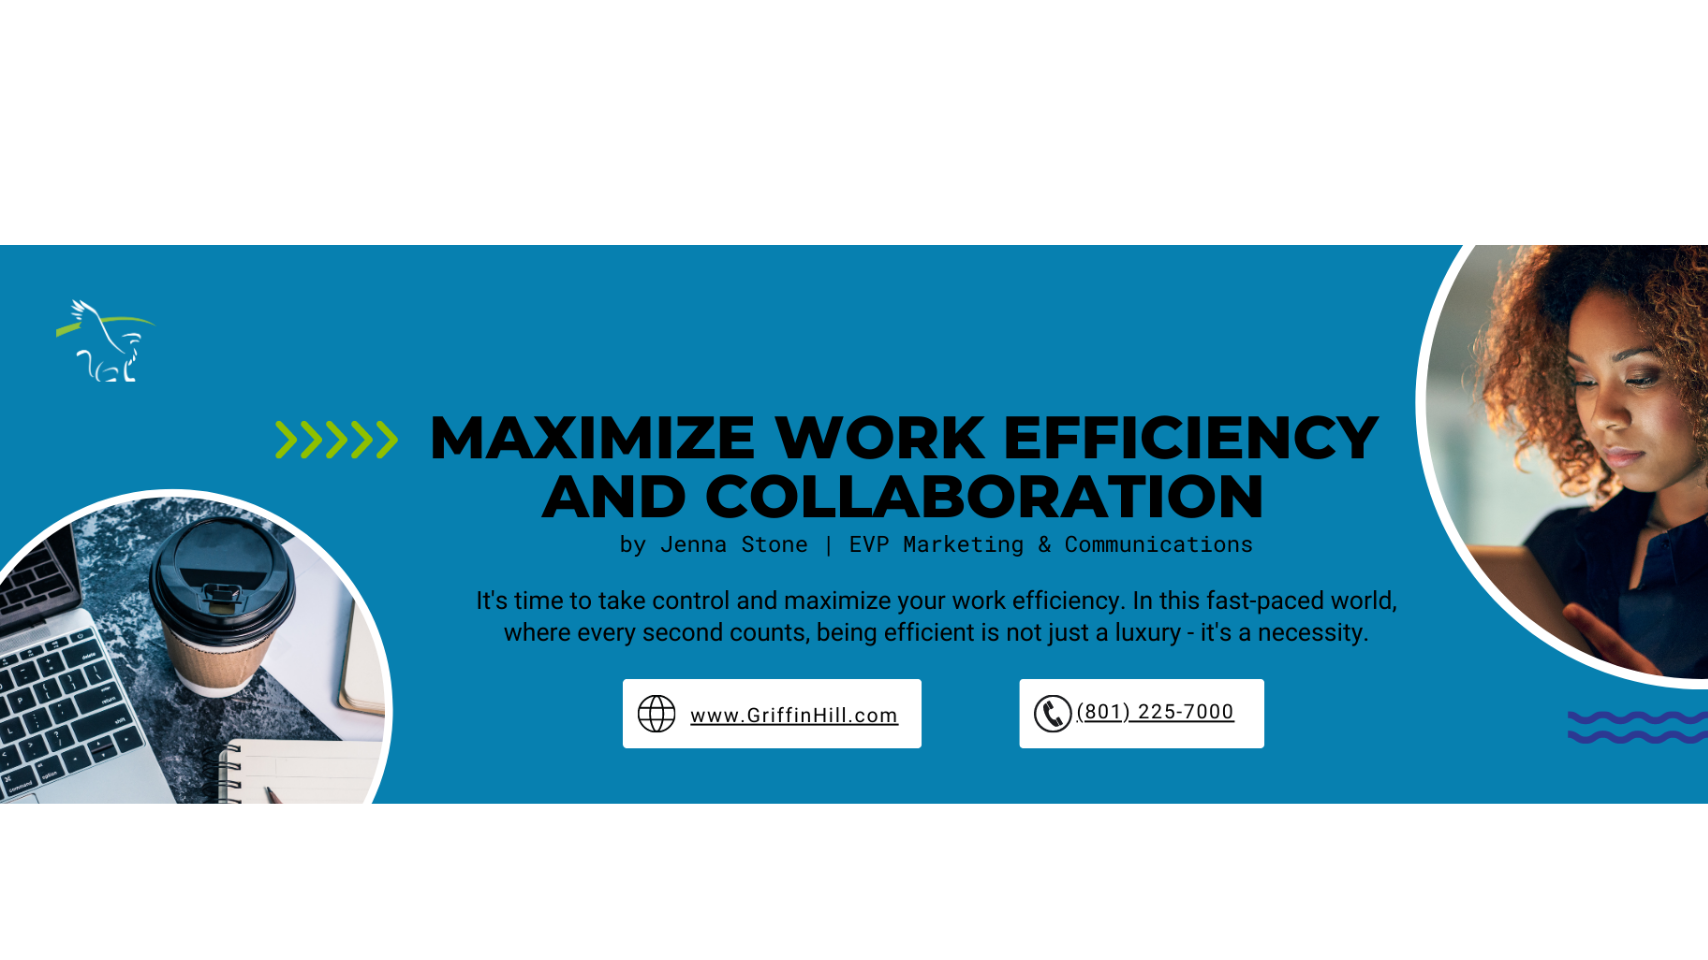 Maximize Work Efficiency and Collaboration - Griffin Hill